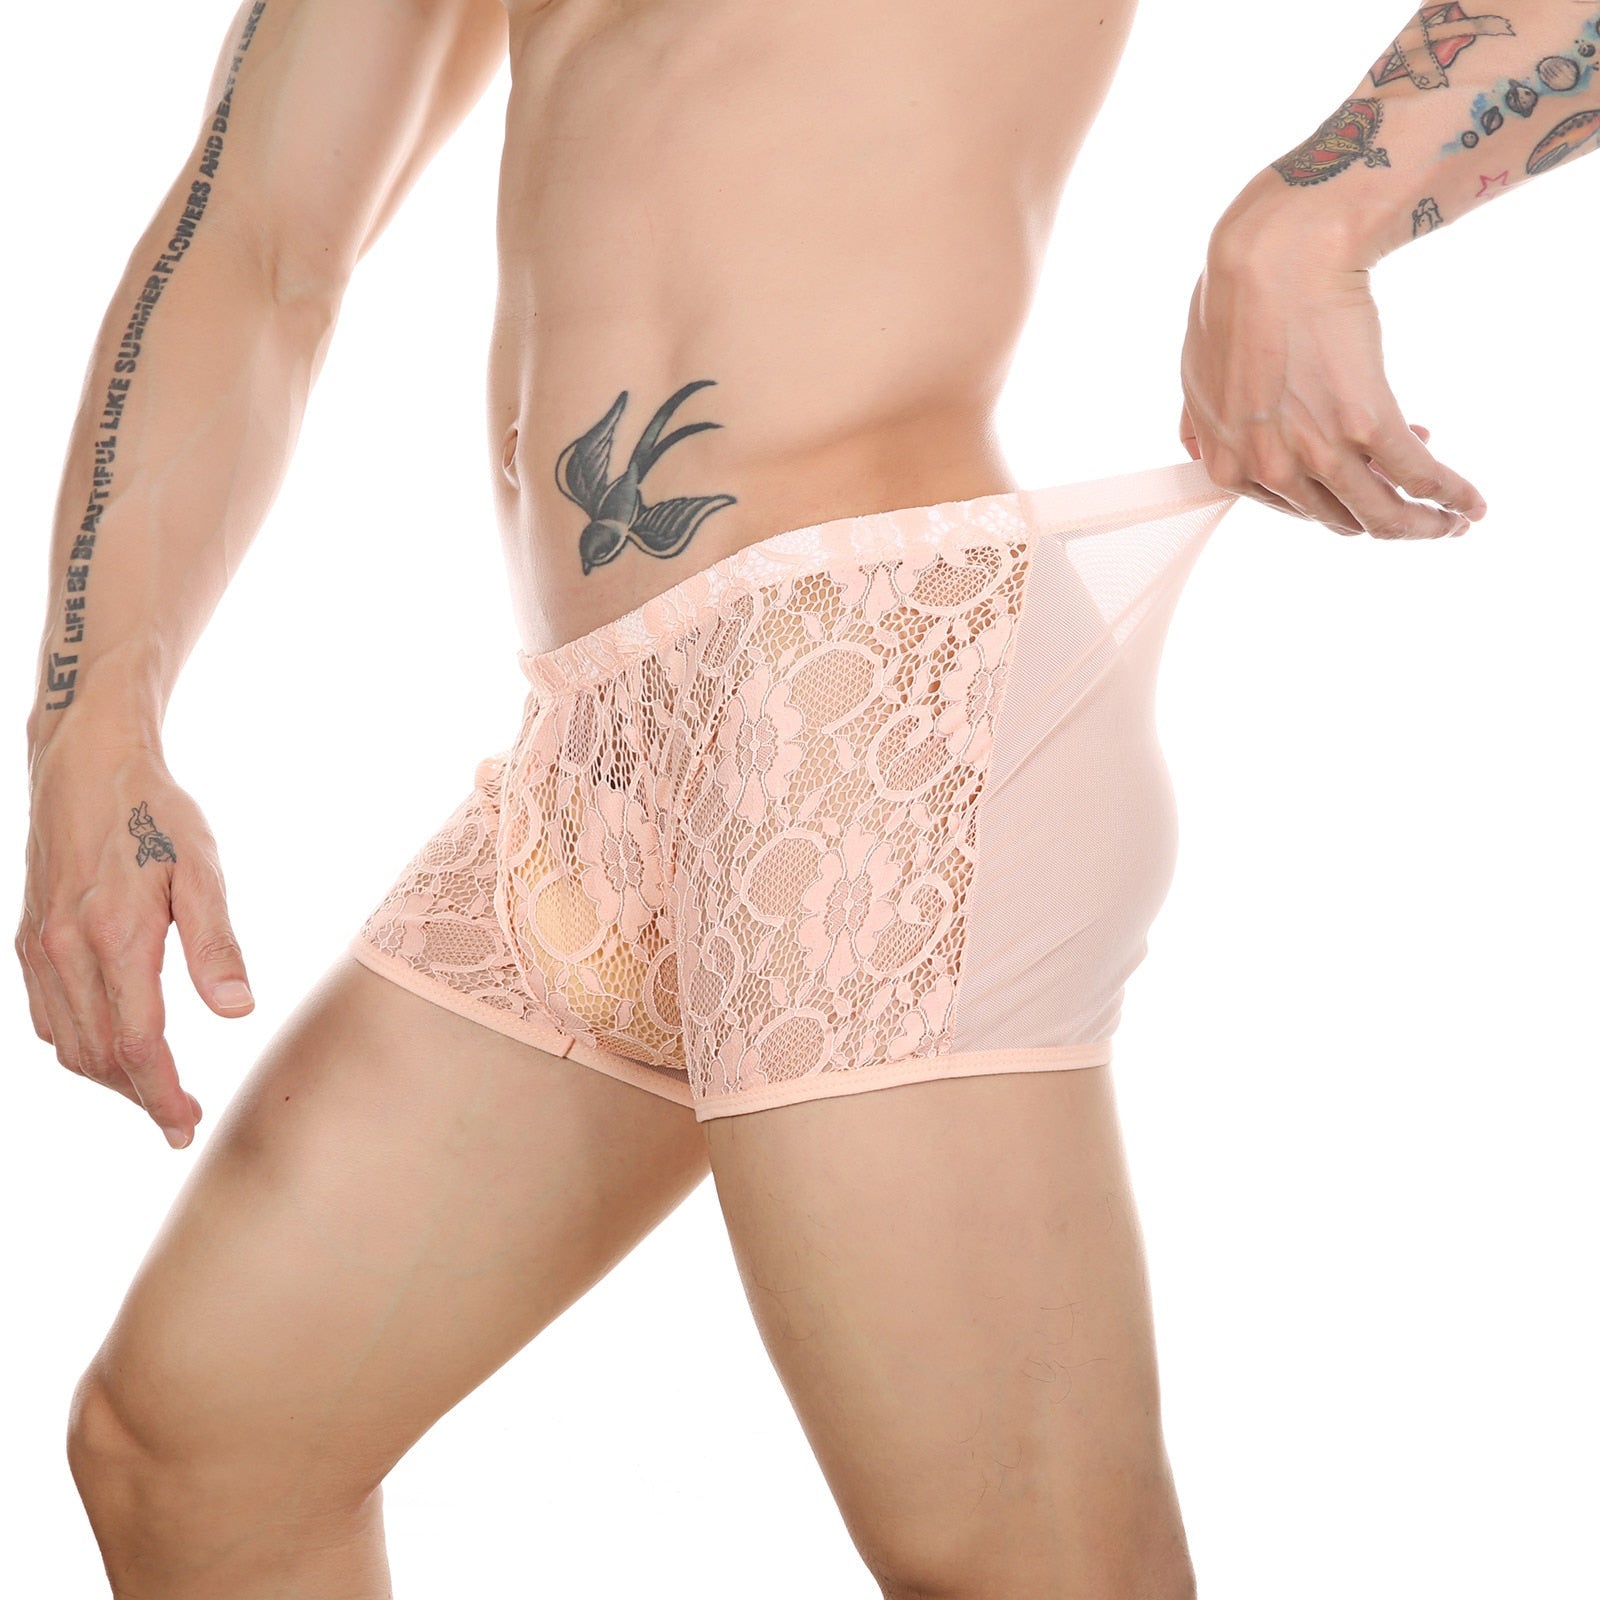 SHEER Lace Boxers 5-Pack